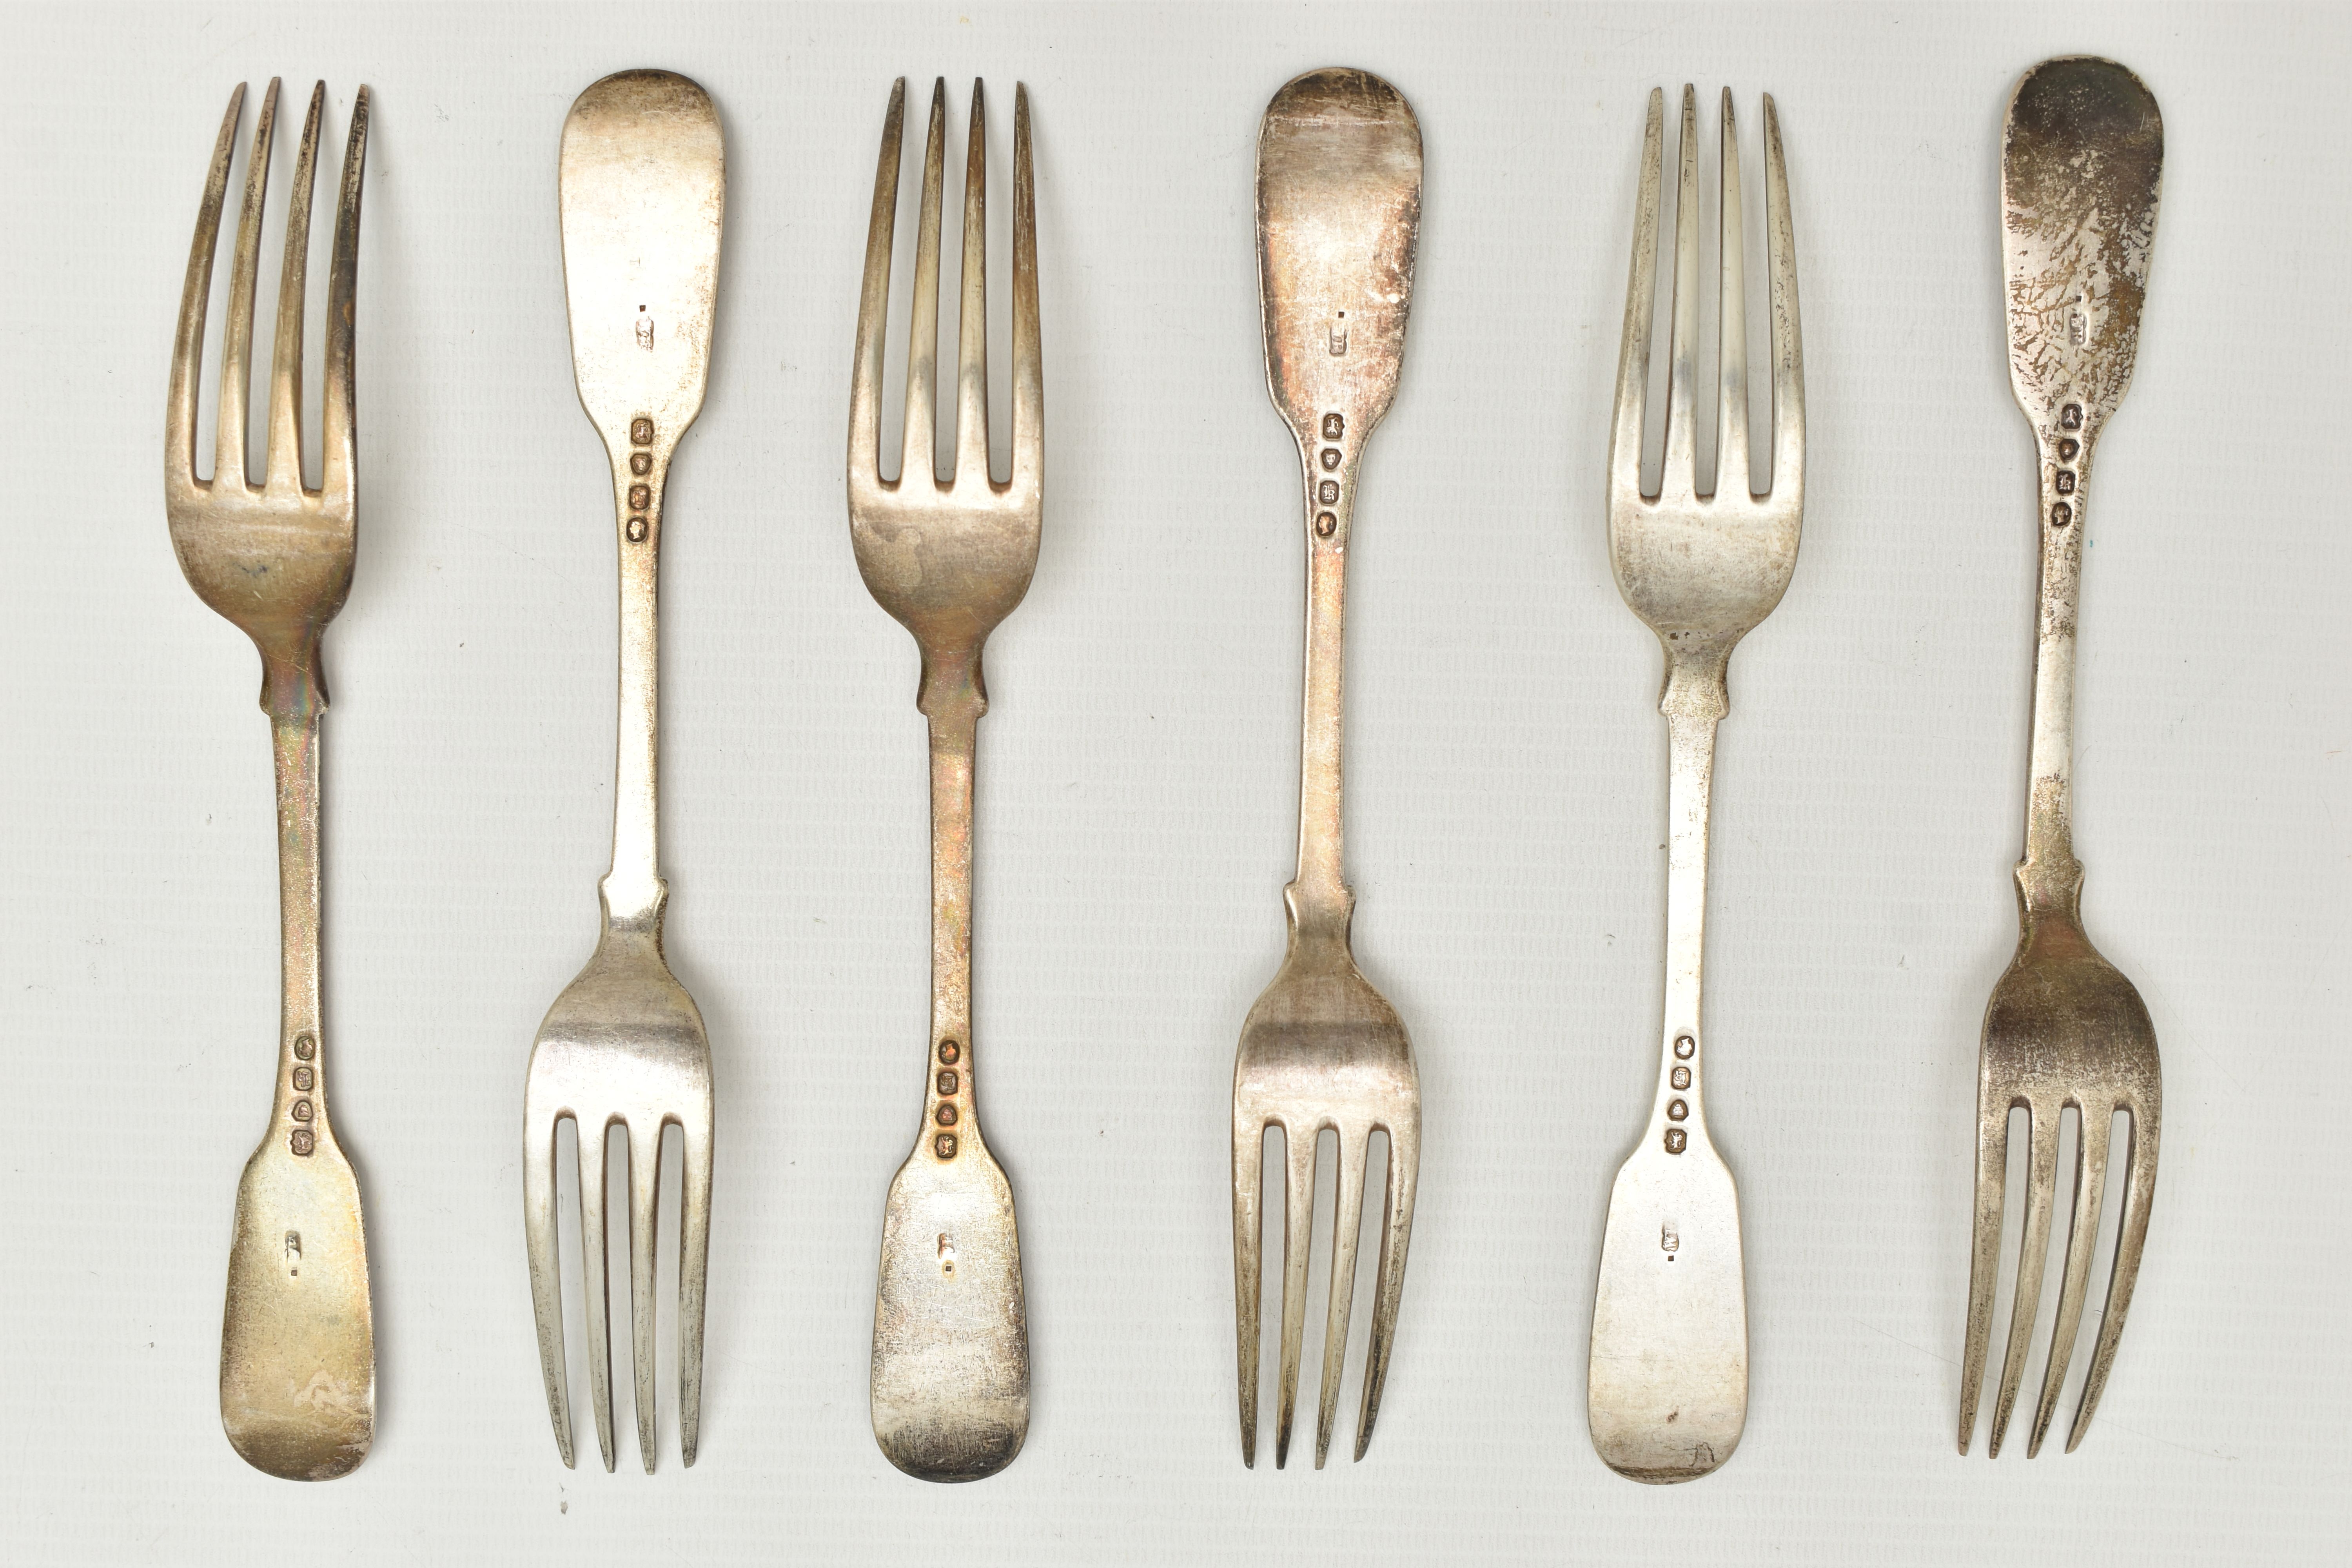 FOUR SILVER TABLESPOONS AND FOUR SILVER FORKS, fiddle pattern, with engraved initial 'D' to each - Image 4 of 5